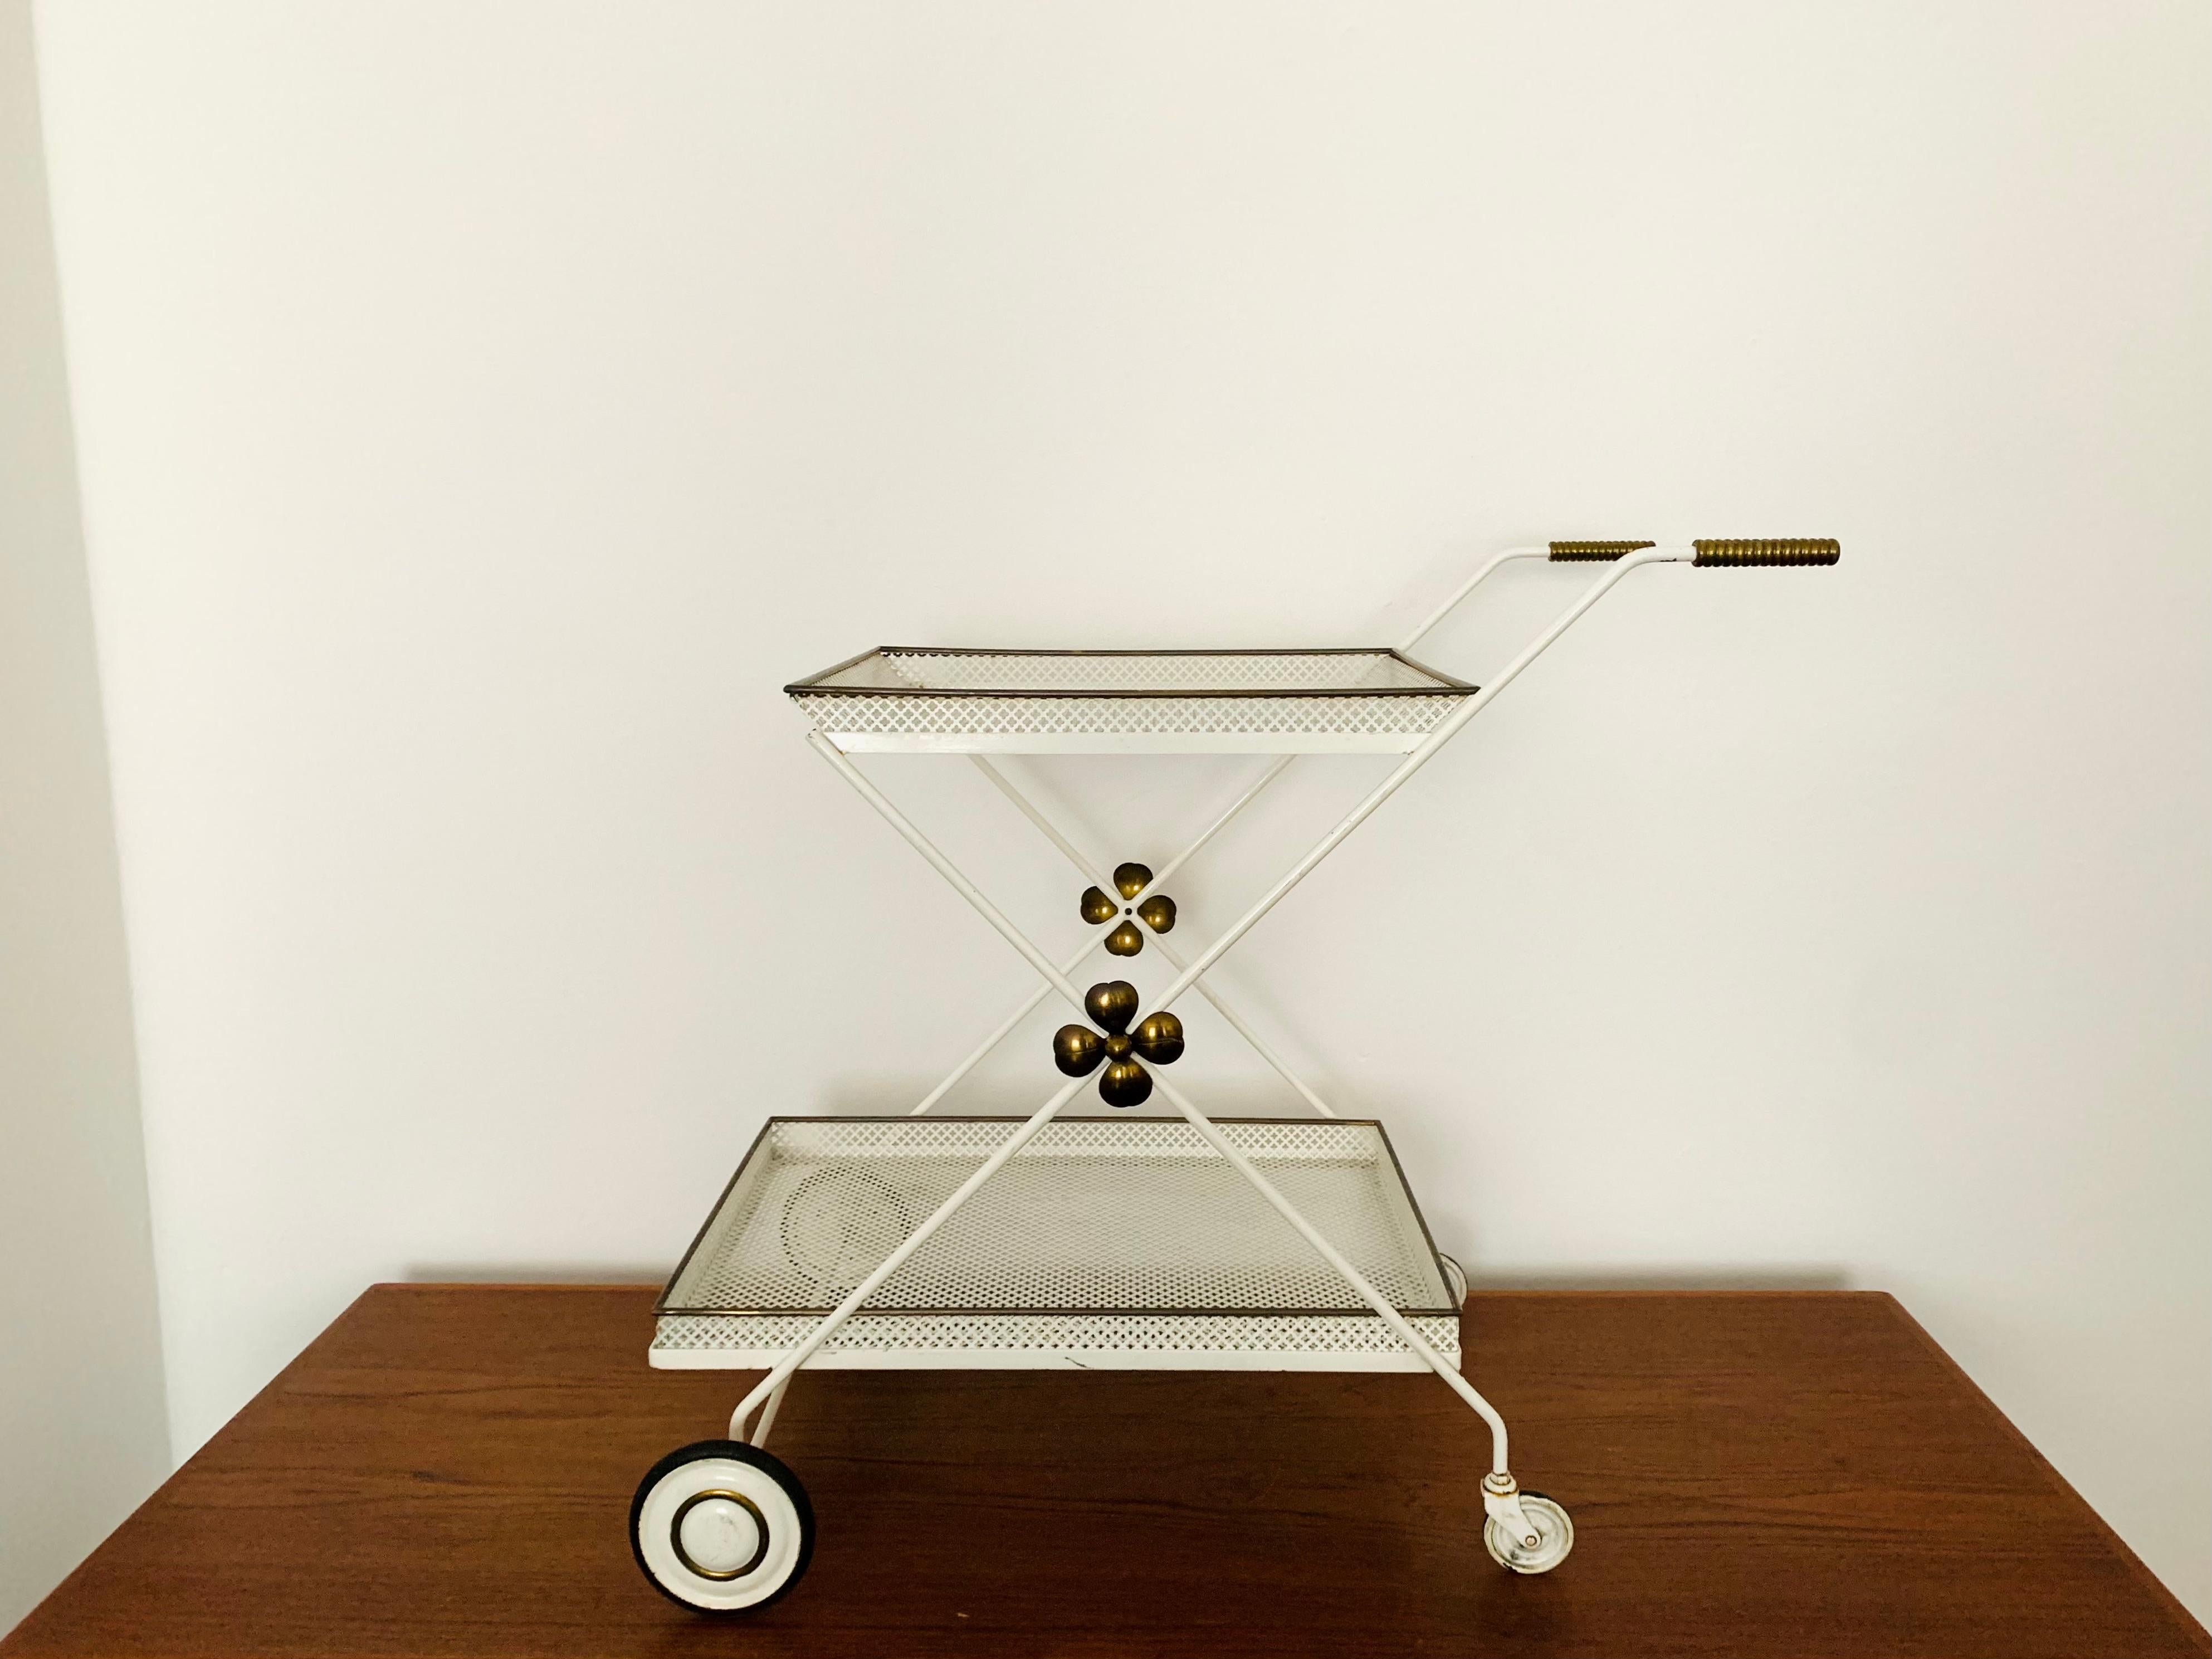 Exceptionally beautiful and very high quality bar trolley or tea trolley from the 1950s.
Very nice detailed design and high-quality workmanship.

Manufacturer: Vereinigte Werkstätten München

Condition:

Very good vintage condition with signs